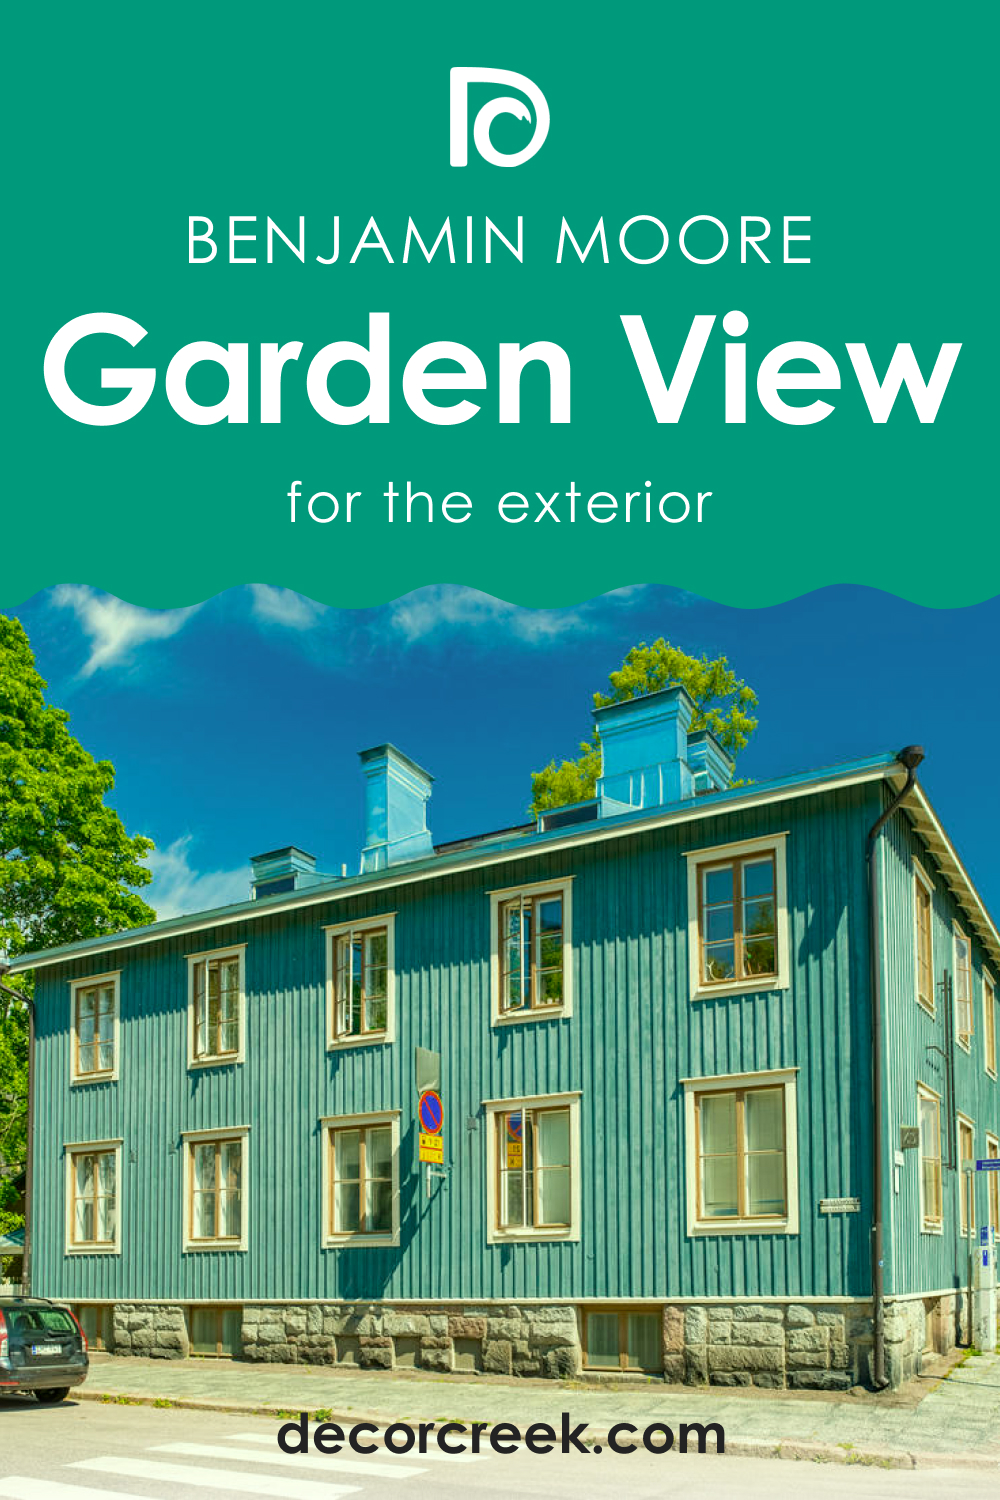 How to Use Garden View 616 for an Exterior?